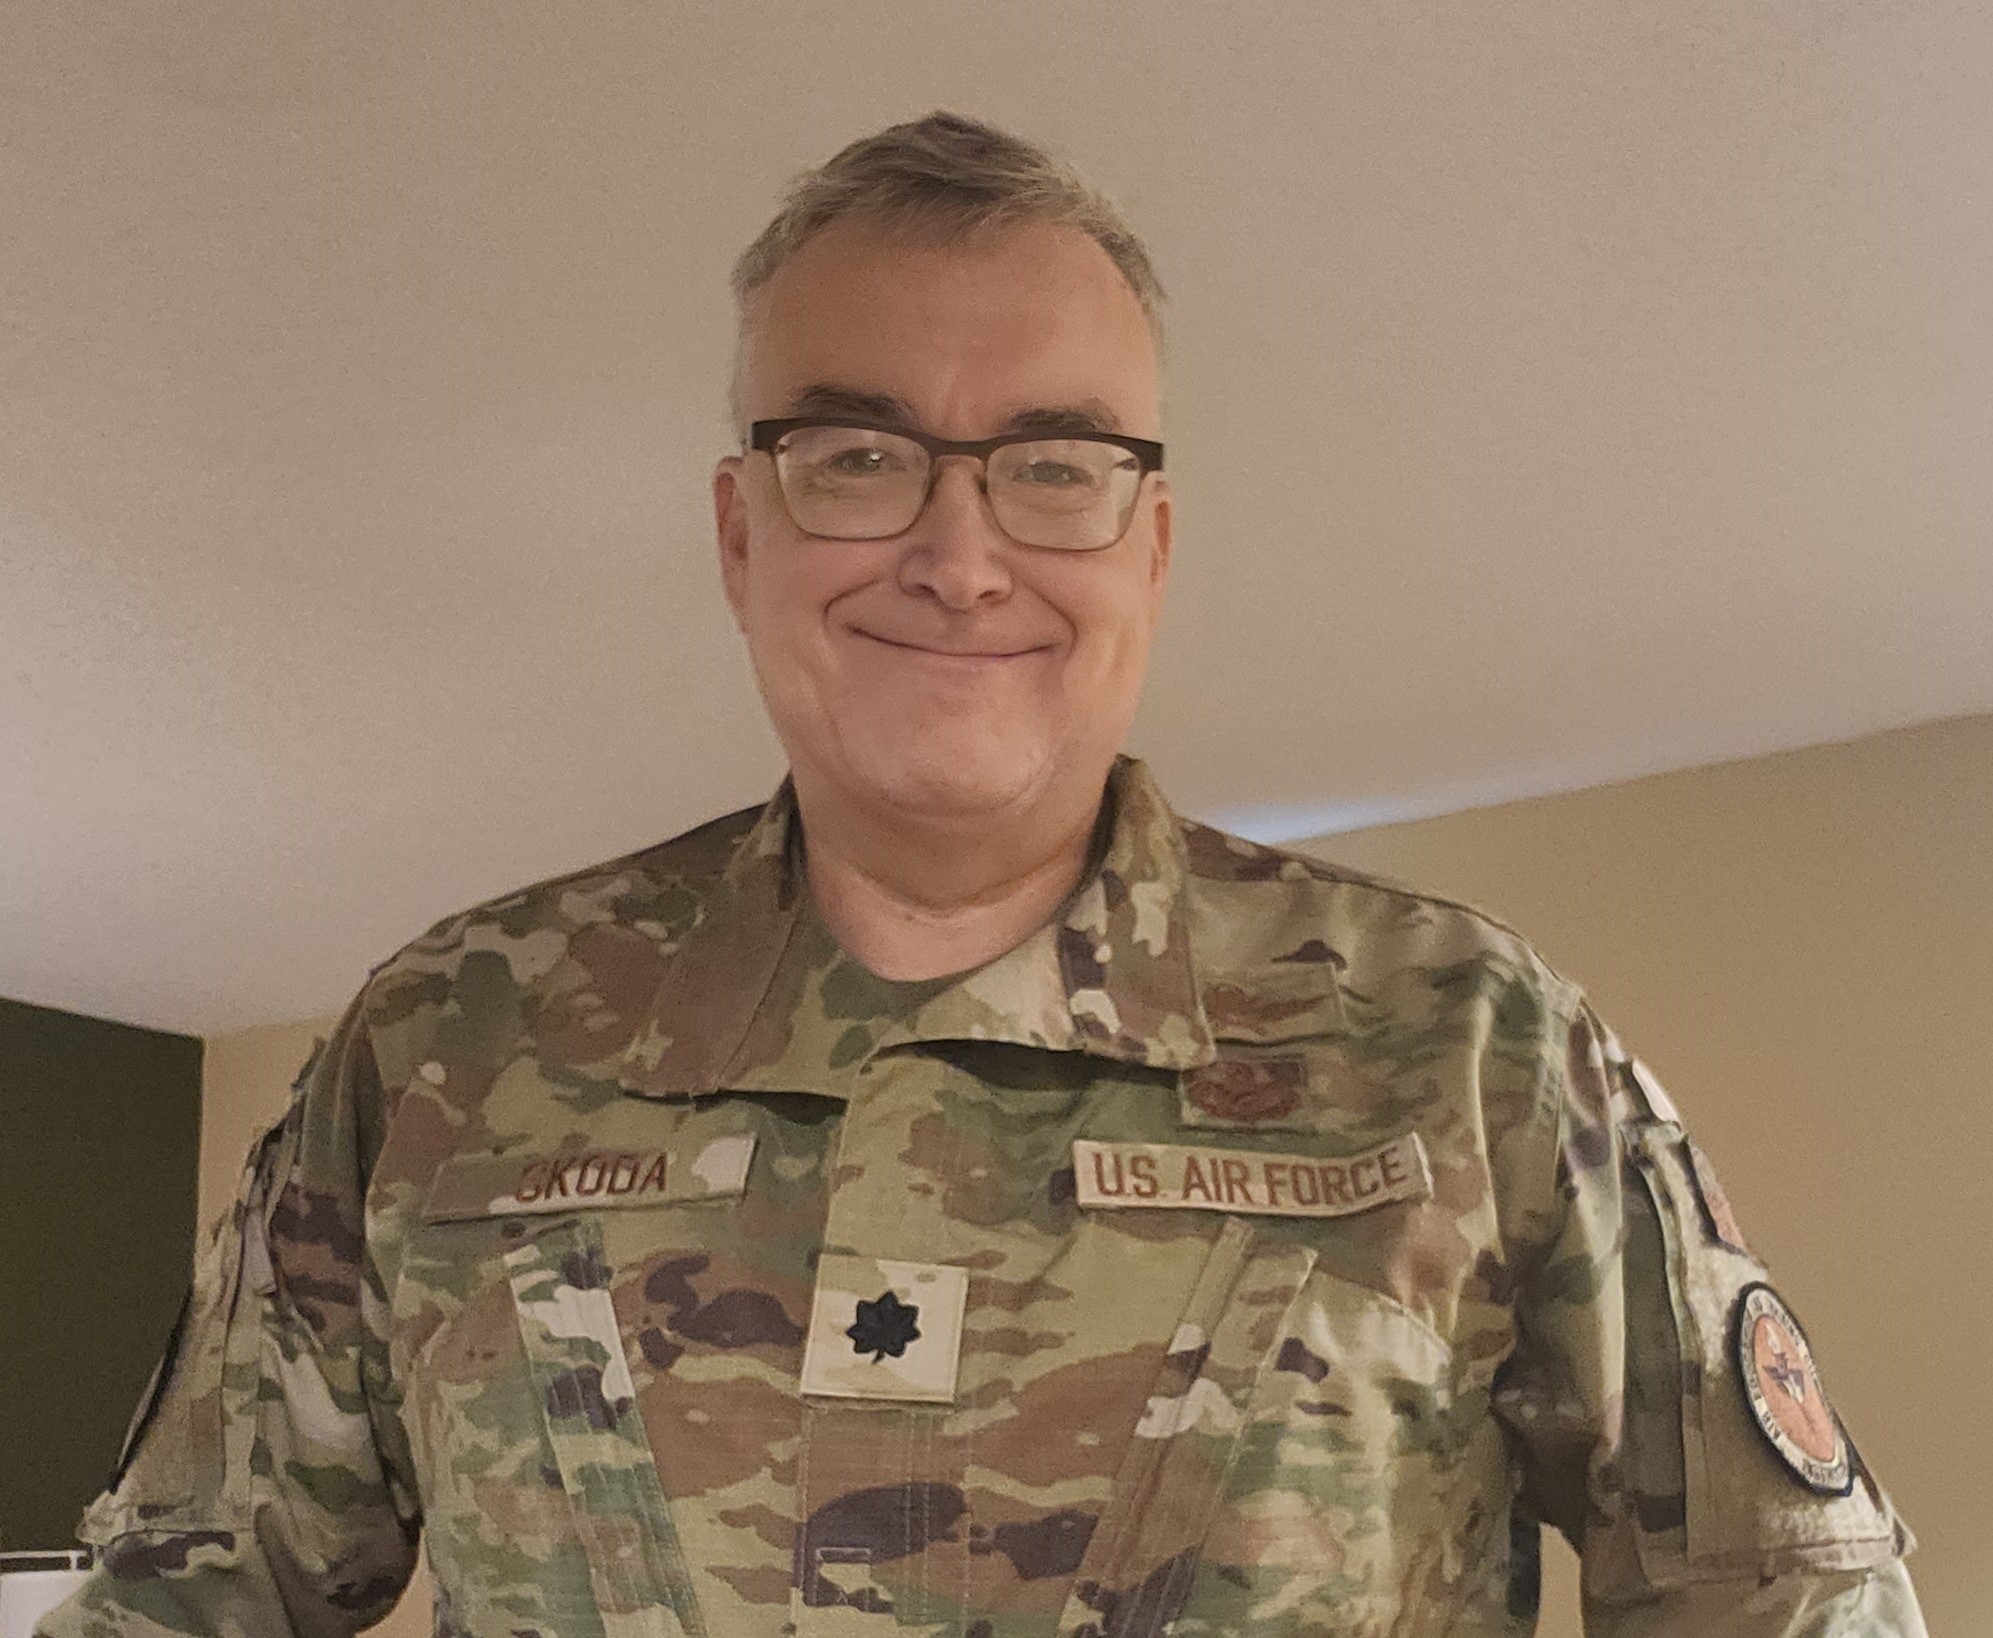 NUARI VP of Cybersecurity Research Elevated to New Leadership Role in the Vermont Air National Guard